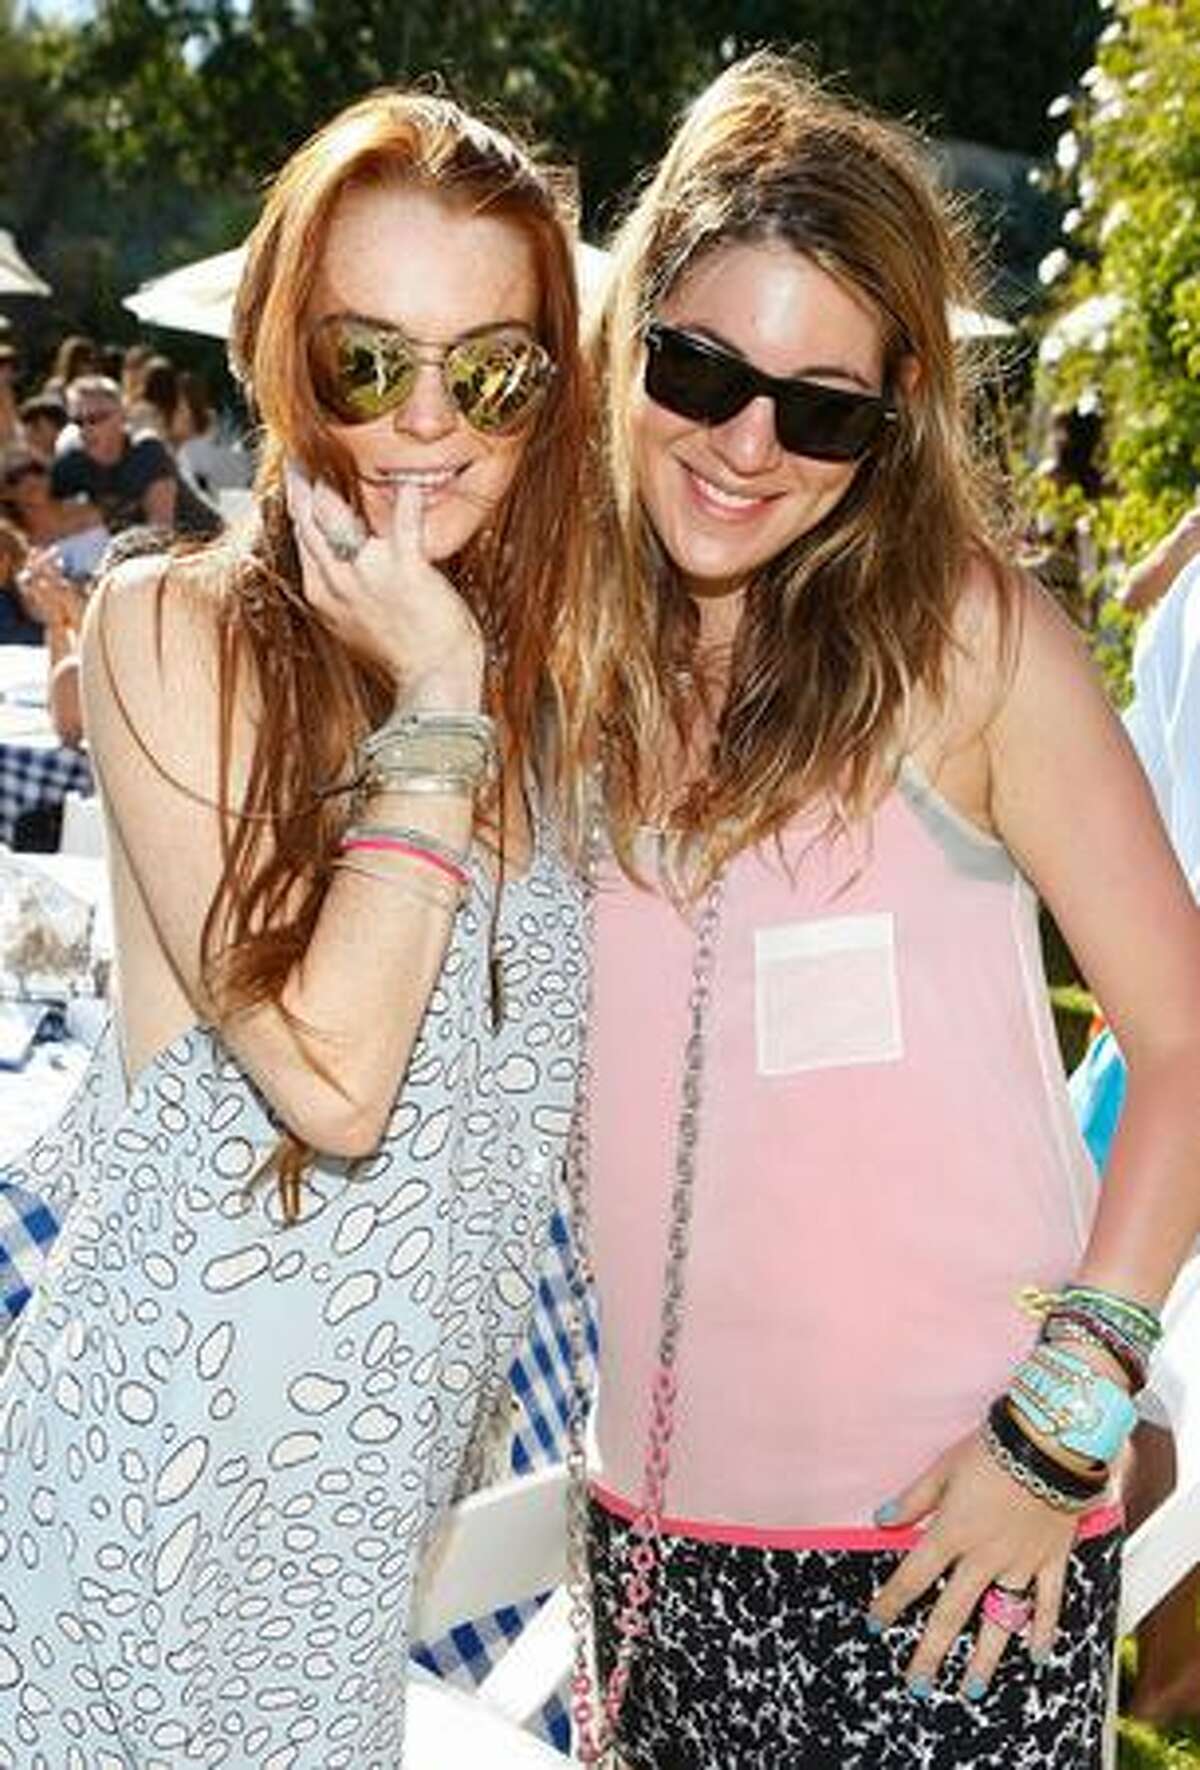 Actress Lindsay Lohan (L) and designer Dani Stahl attend the Lia Sophia Clam Bake at a private residence in Malibu, California.